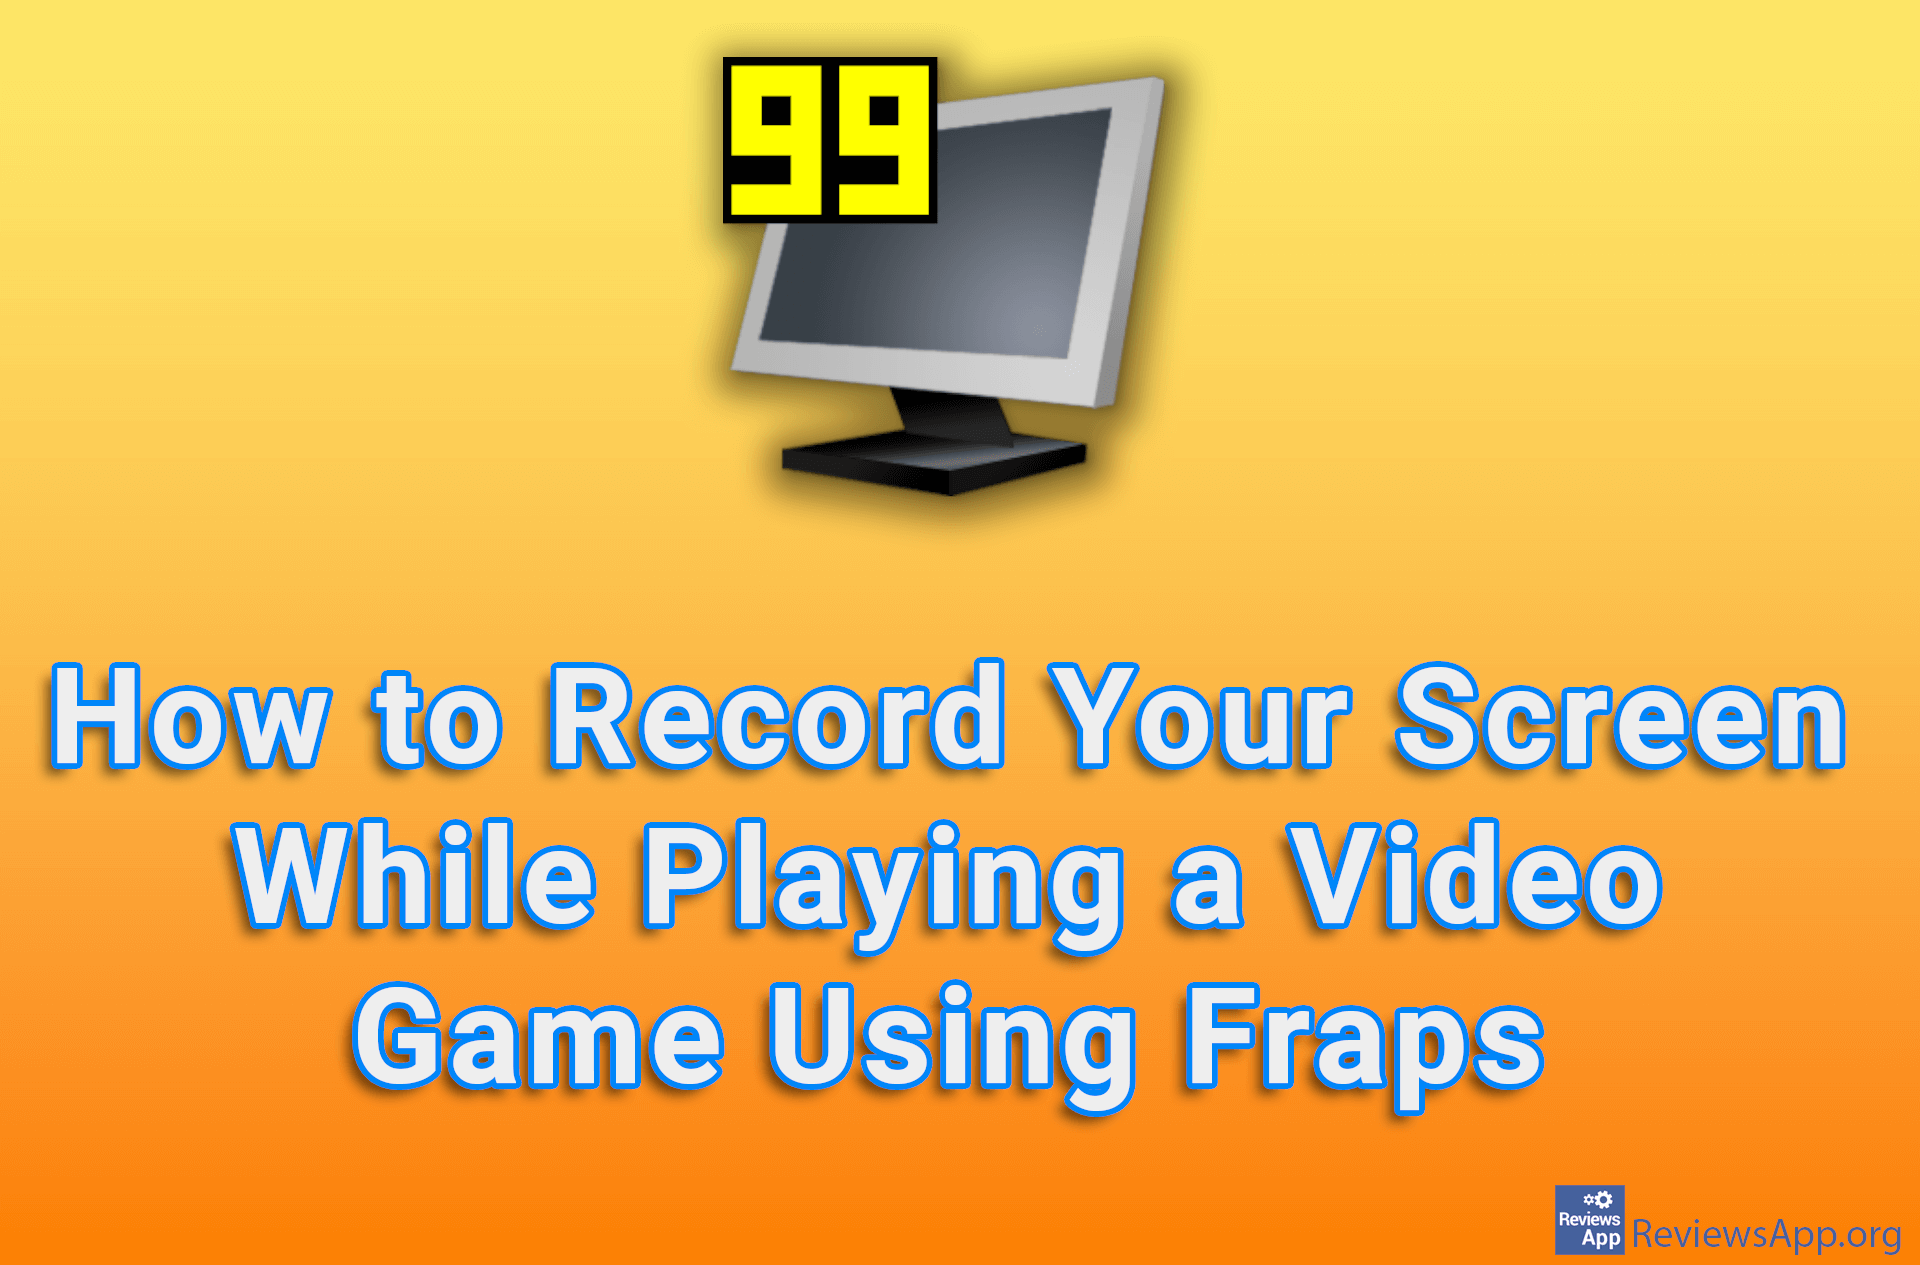 How to Record Your Screen While Playing a Video Game Using Fraps